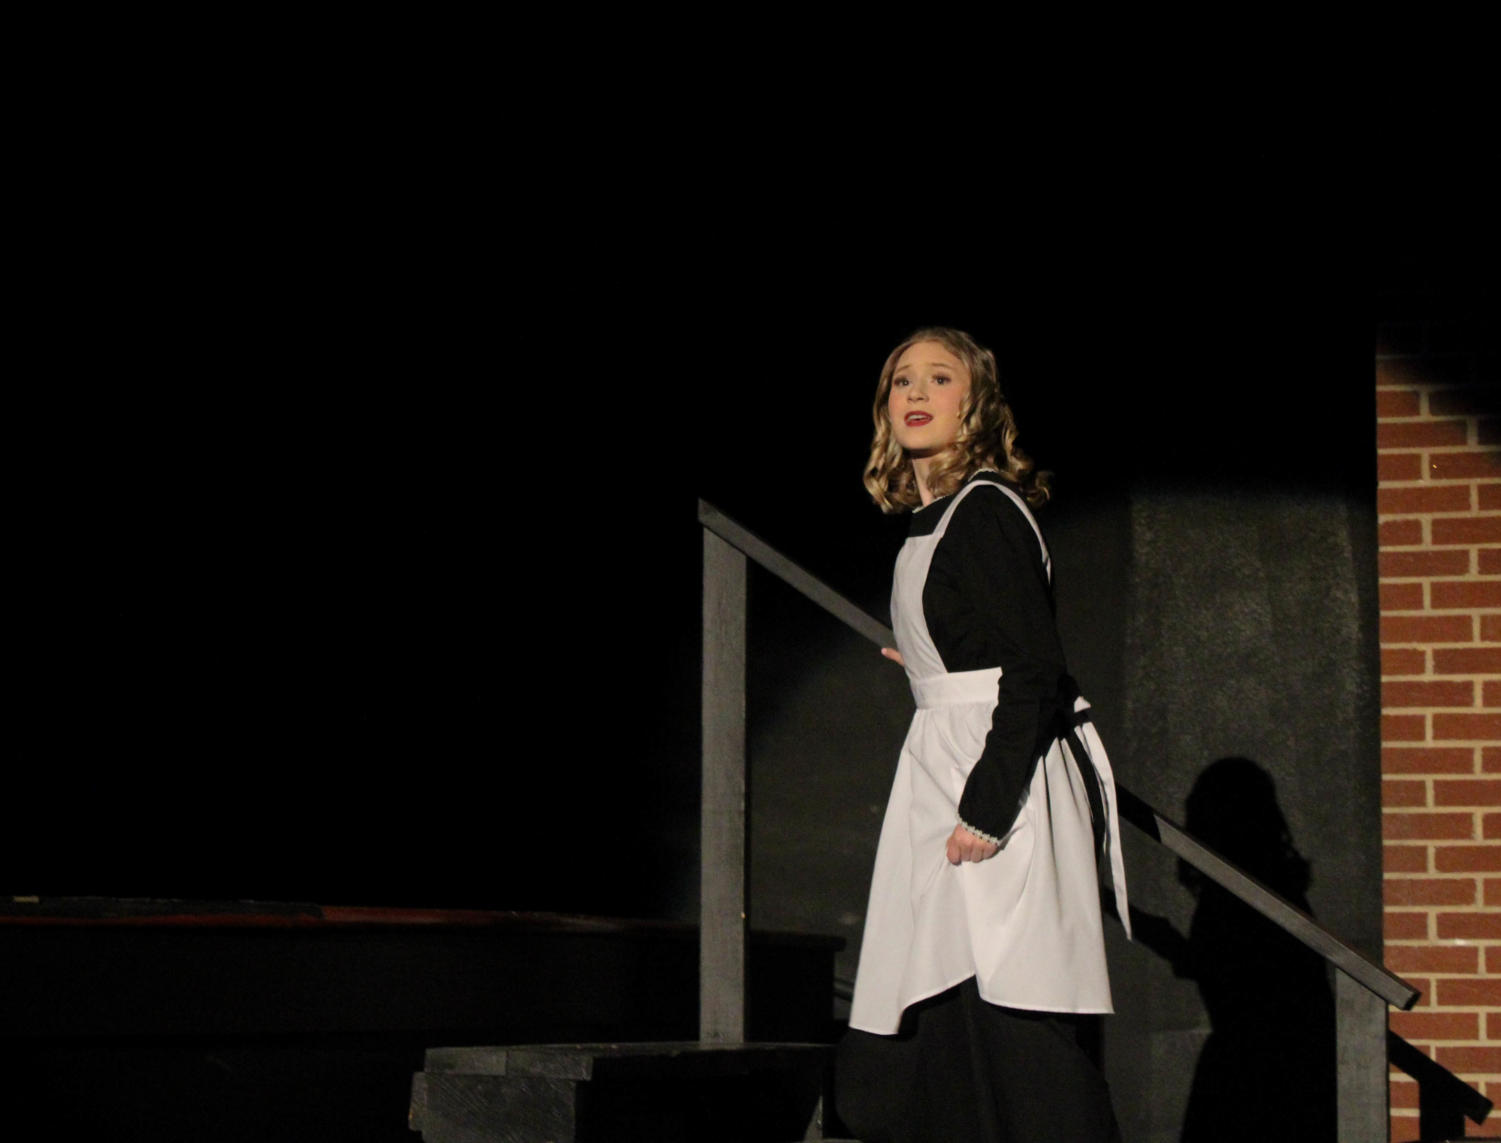 Senior Emma Foughty sings “The Sound of Music” at her dress rehearsal on Jan. 17. This is Foughty’s 13th show in her performing career and her ninth show at Hebron.